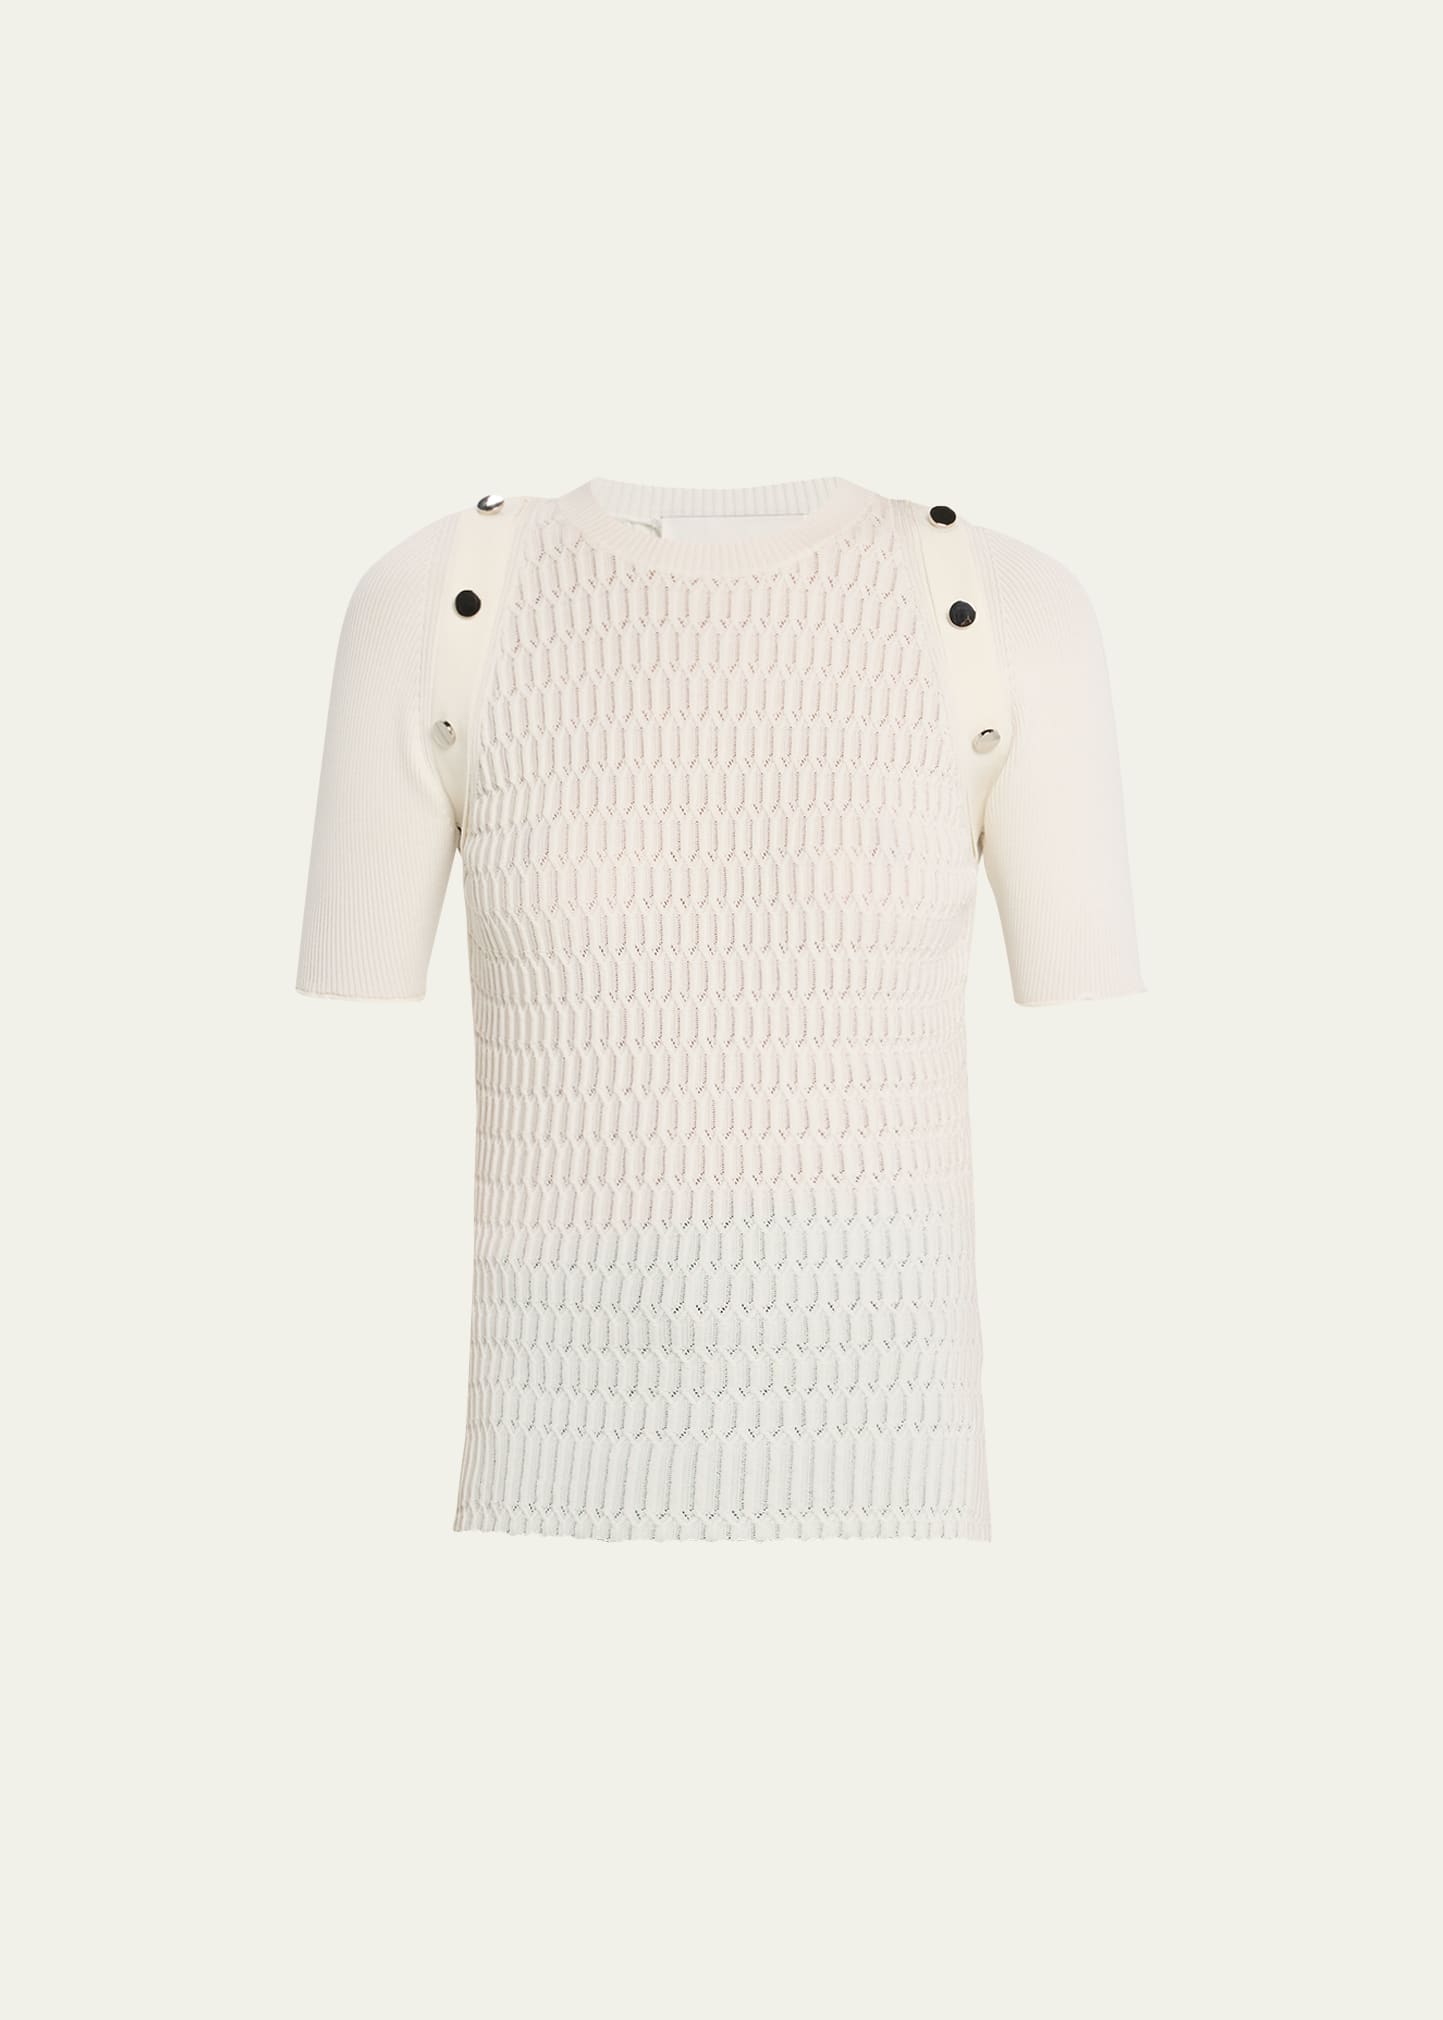 3.1 Phillip Lim / フィリップ リム Short-sleeve Honeycomb-stitch Top In Ivory